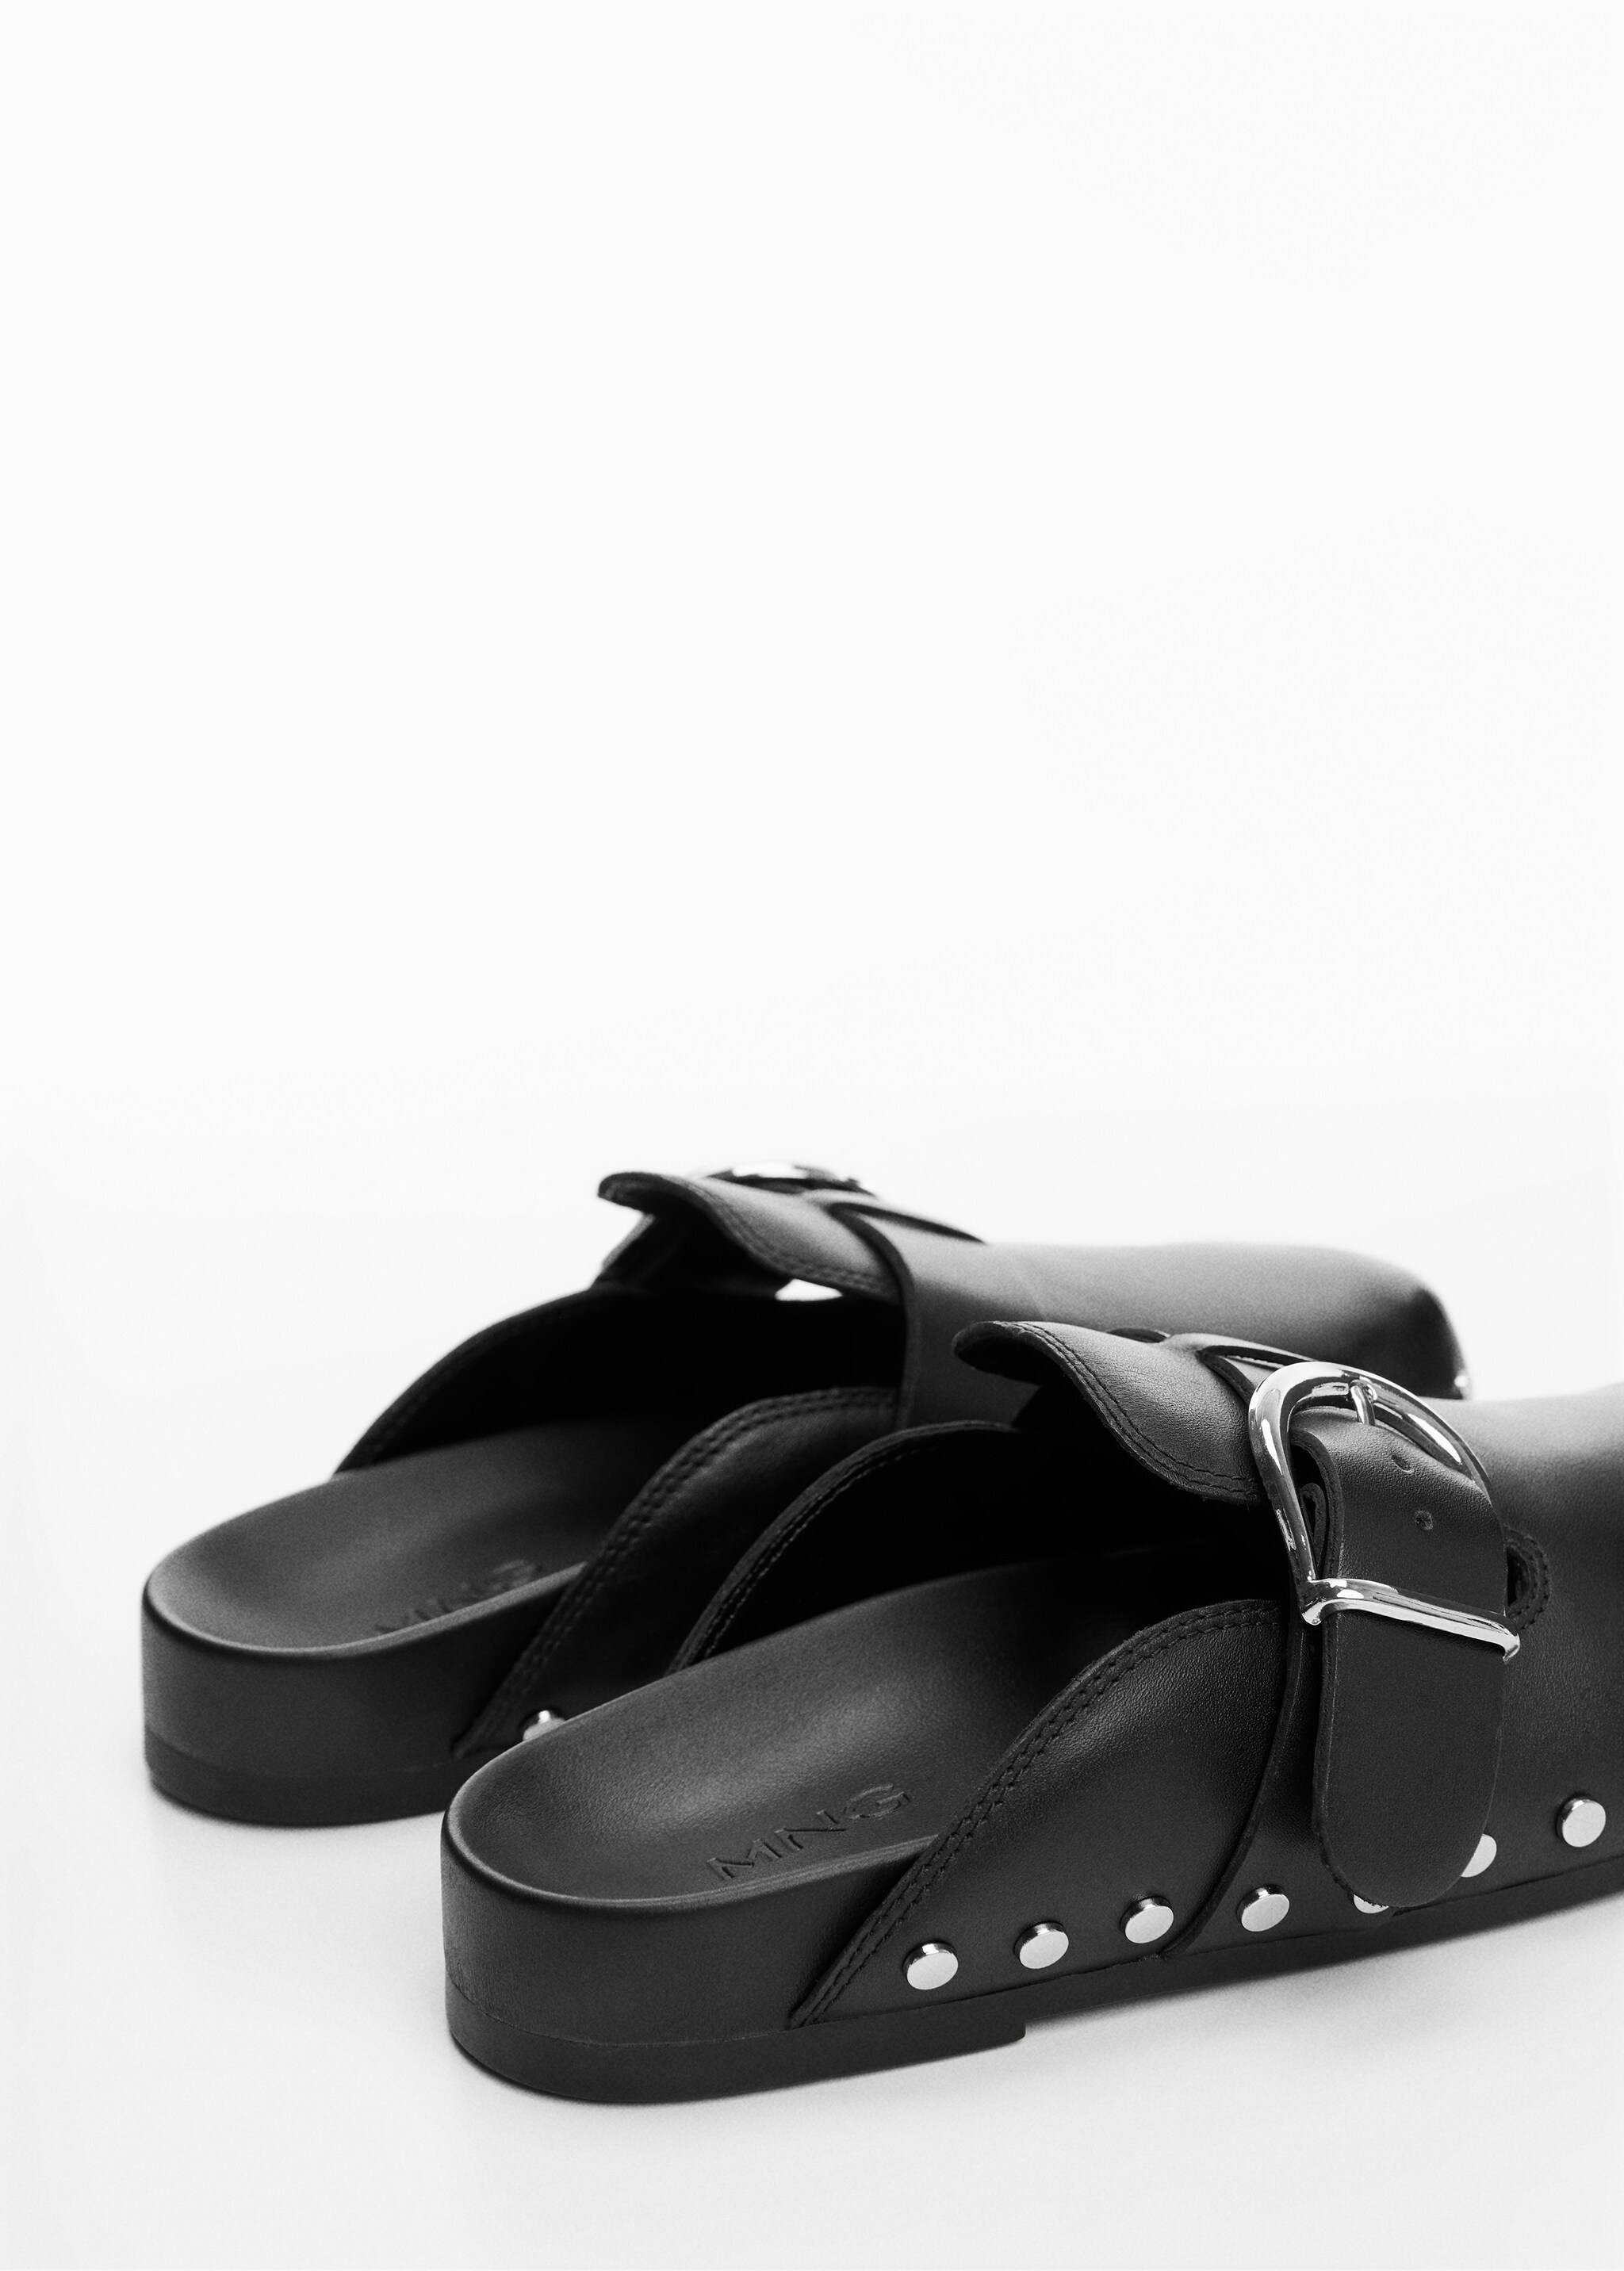 Studded leather clog - Details of the article 1